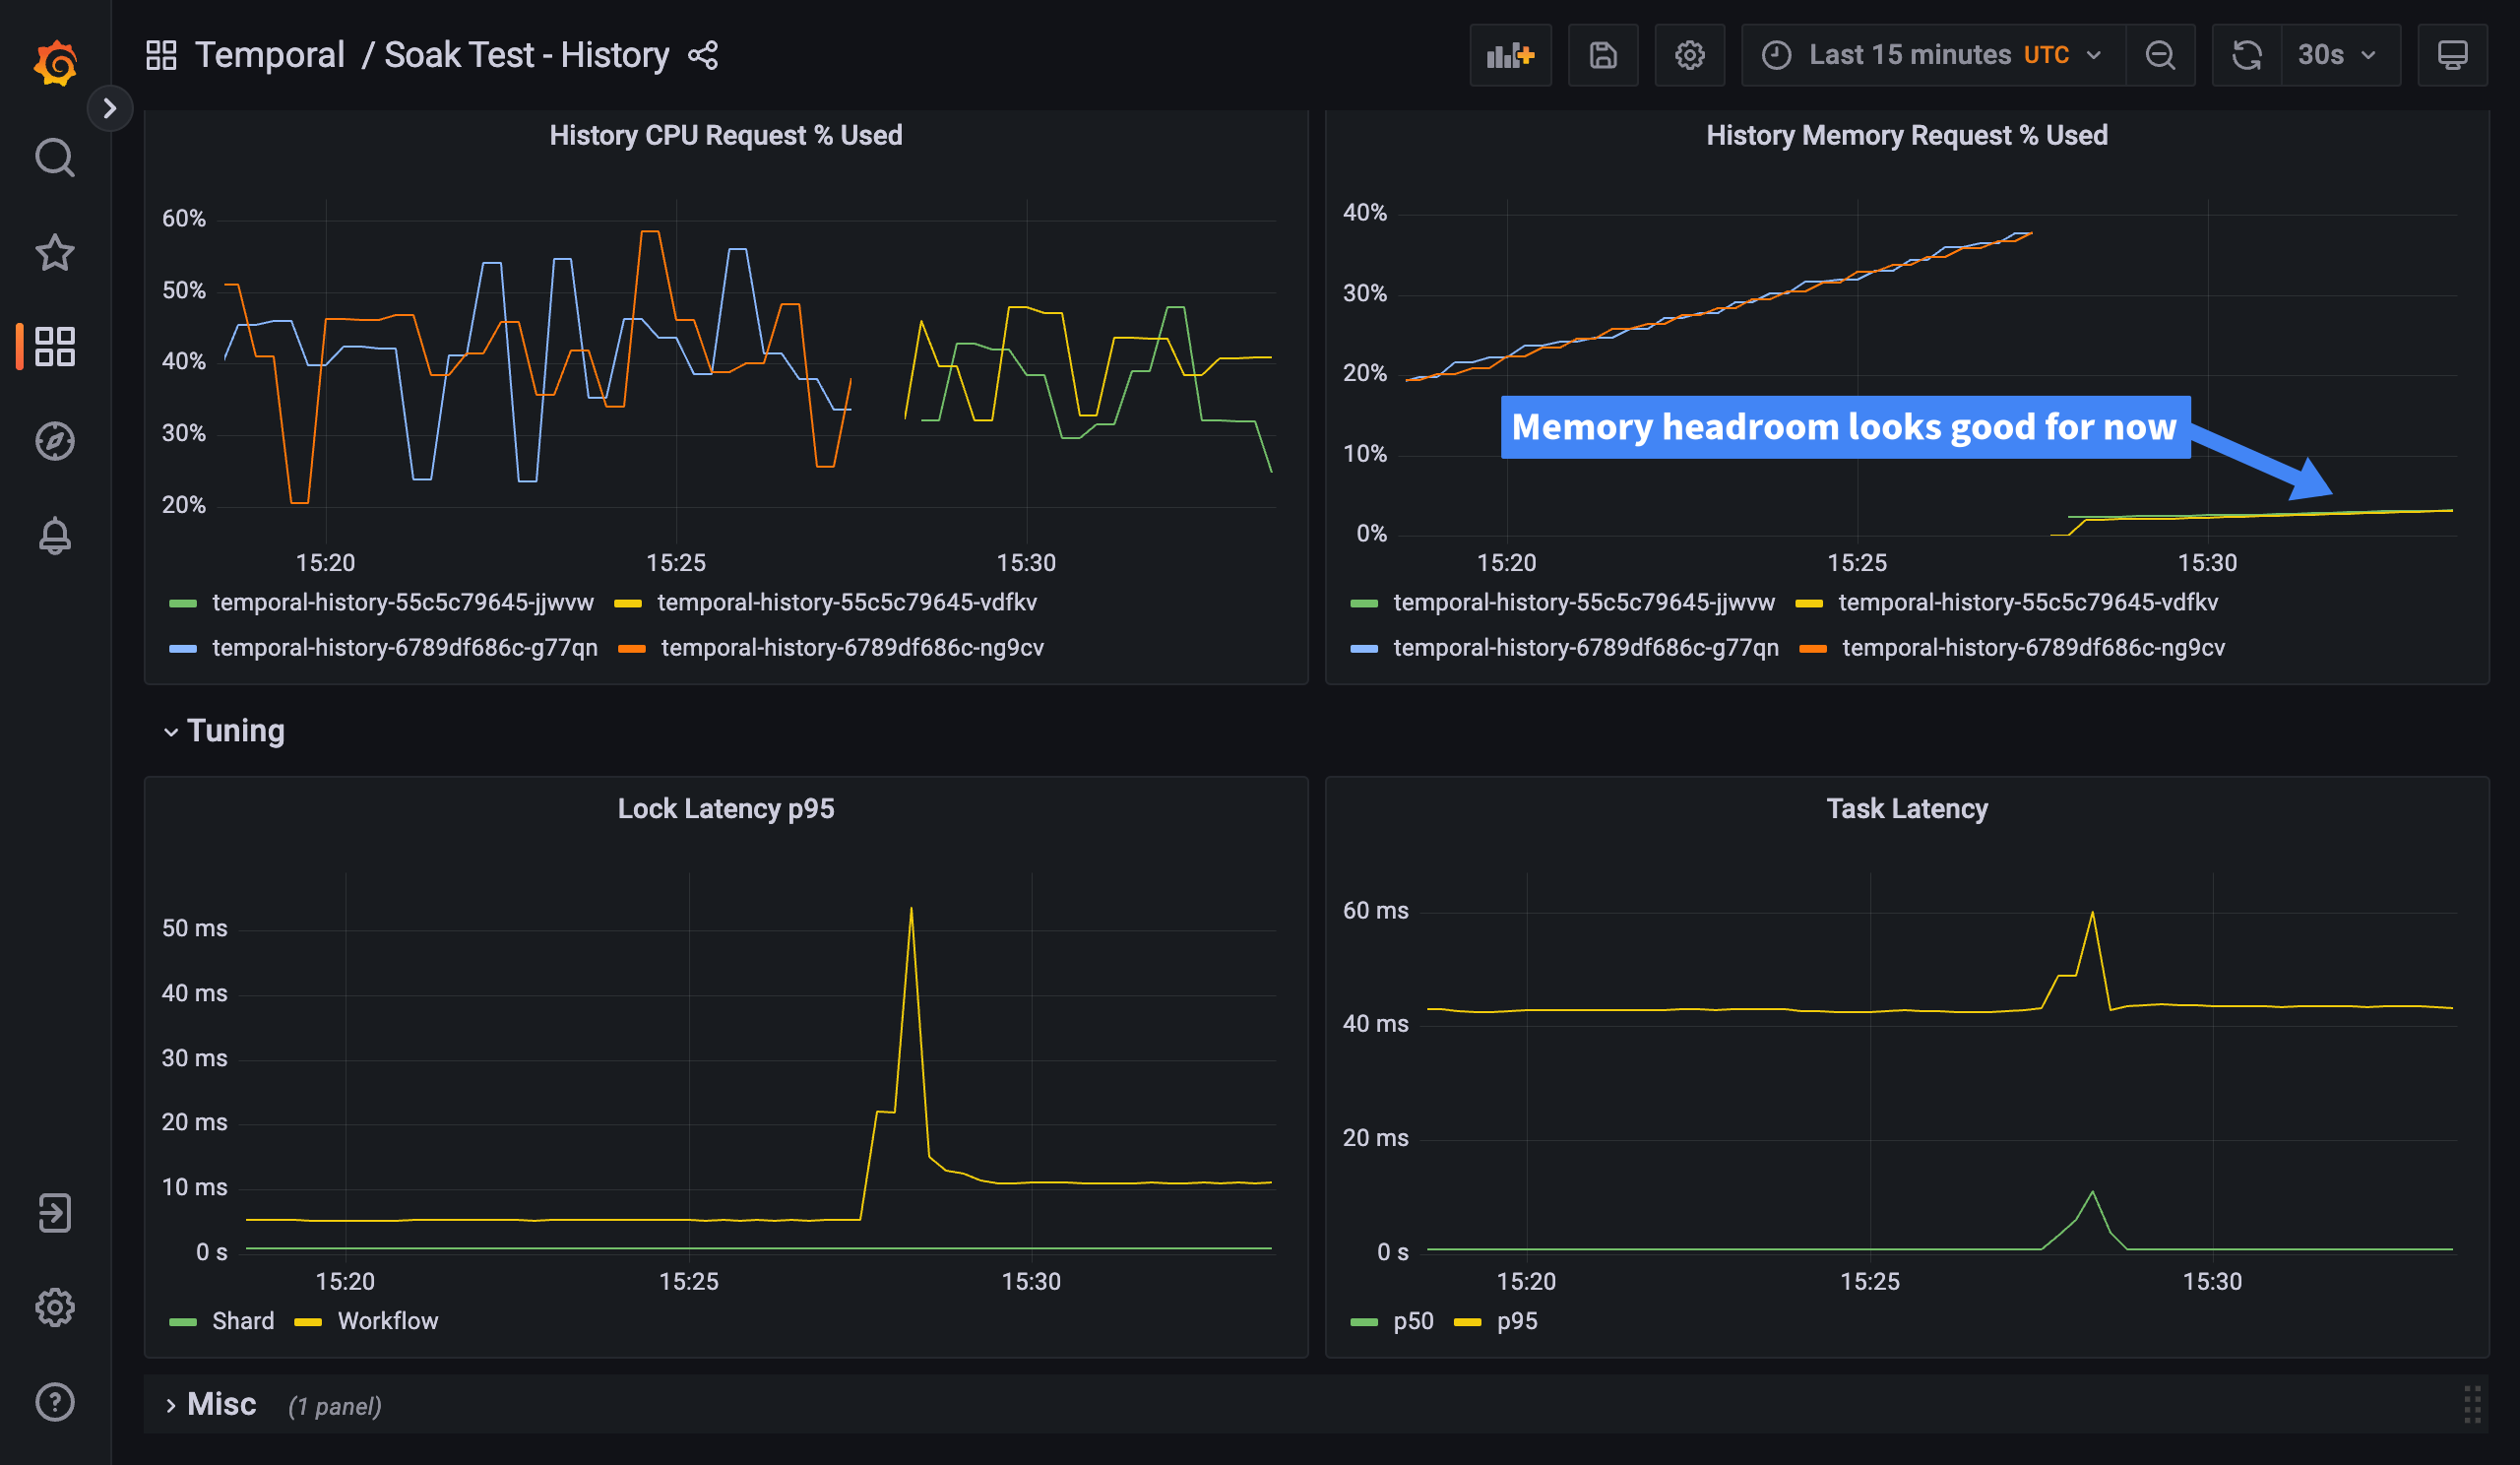 History Dashboard: History pods with memory headroom